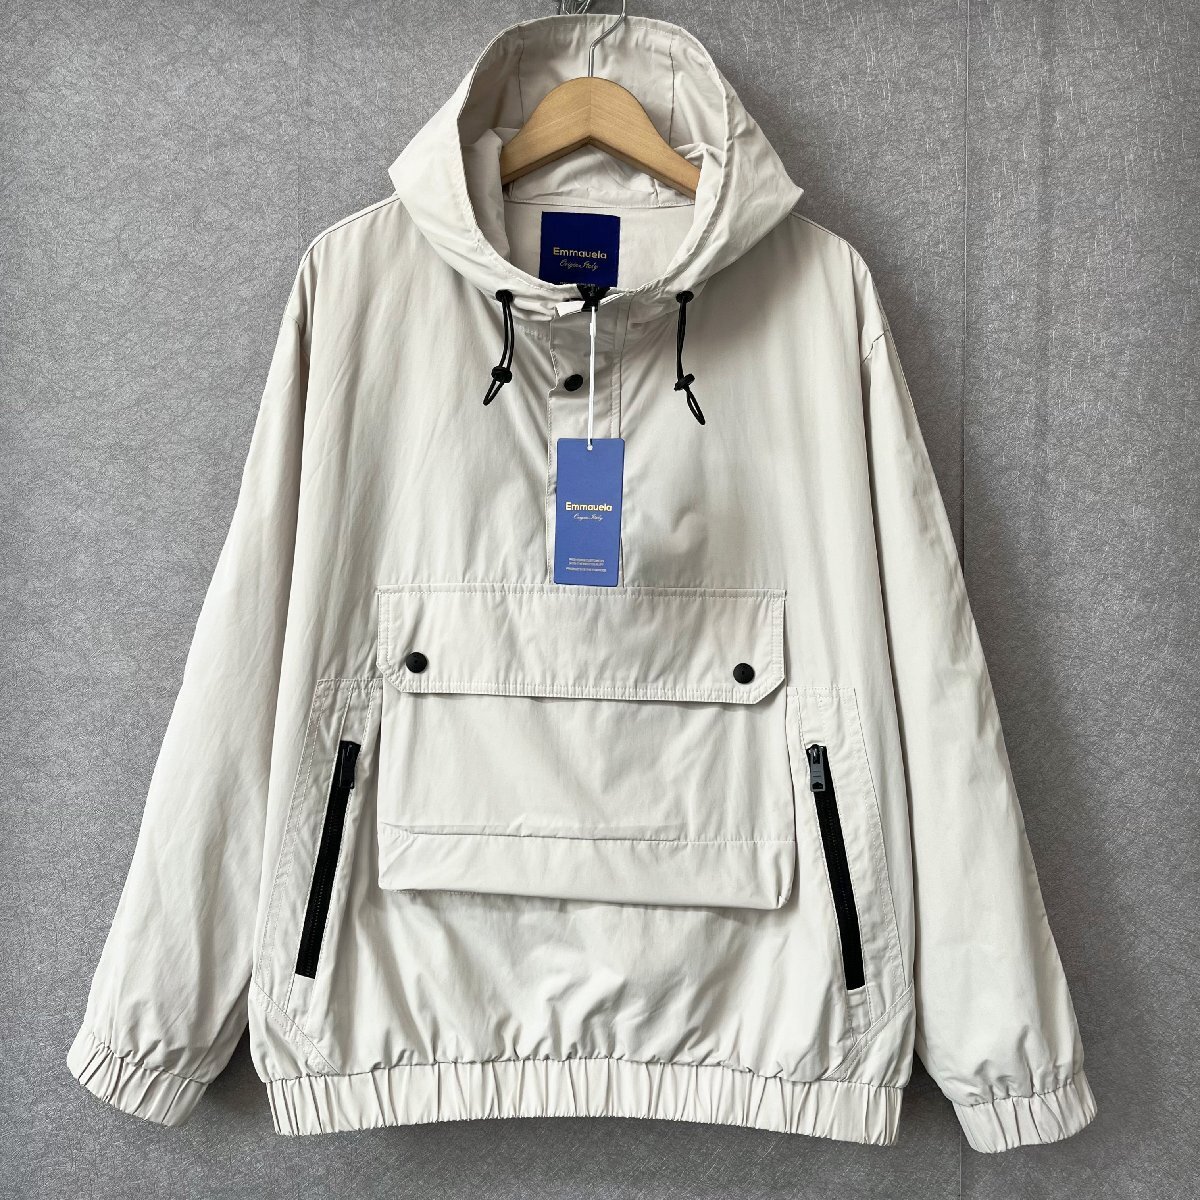 ** standard * Parker regular price 3 ten thousand *Emmauela* Italy * milano departure * on shortage of stock hand piece . ventilation pull over . manner outer unisex 2XL/52 size 